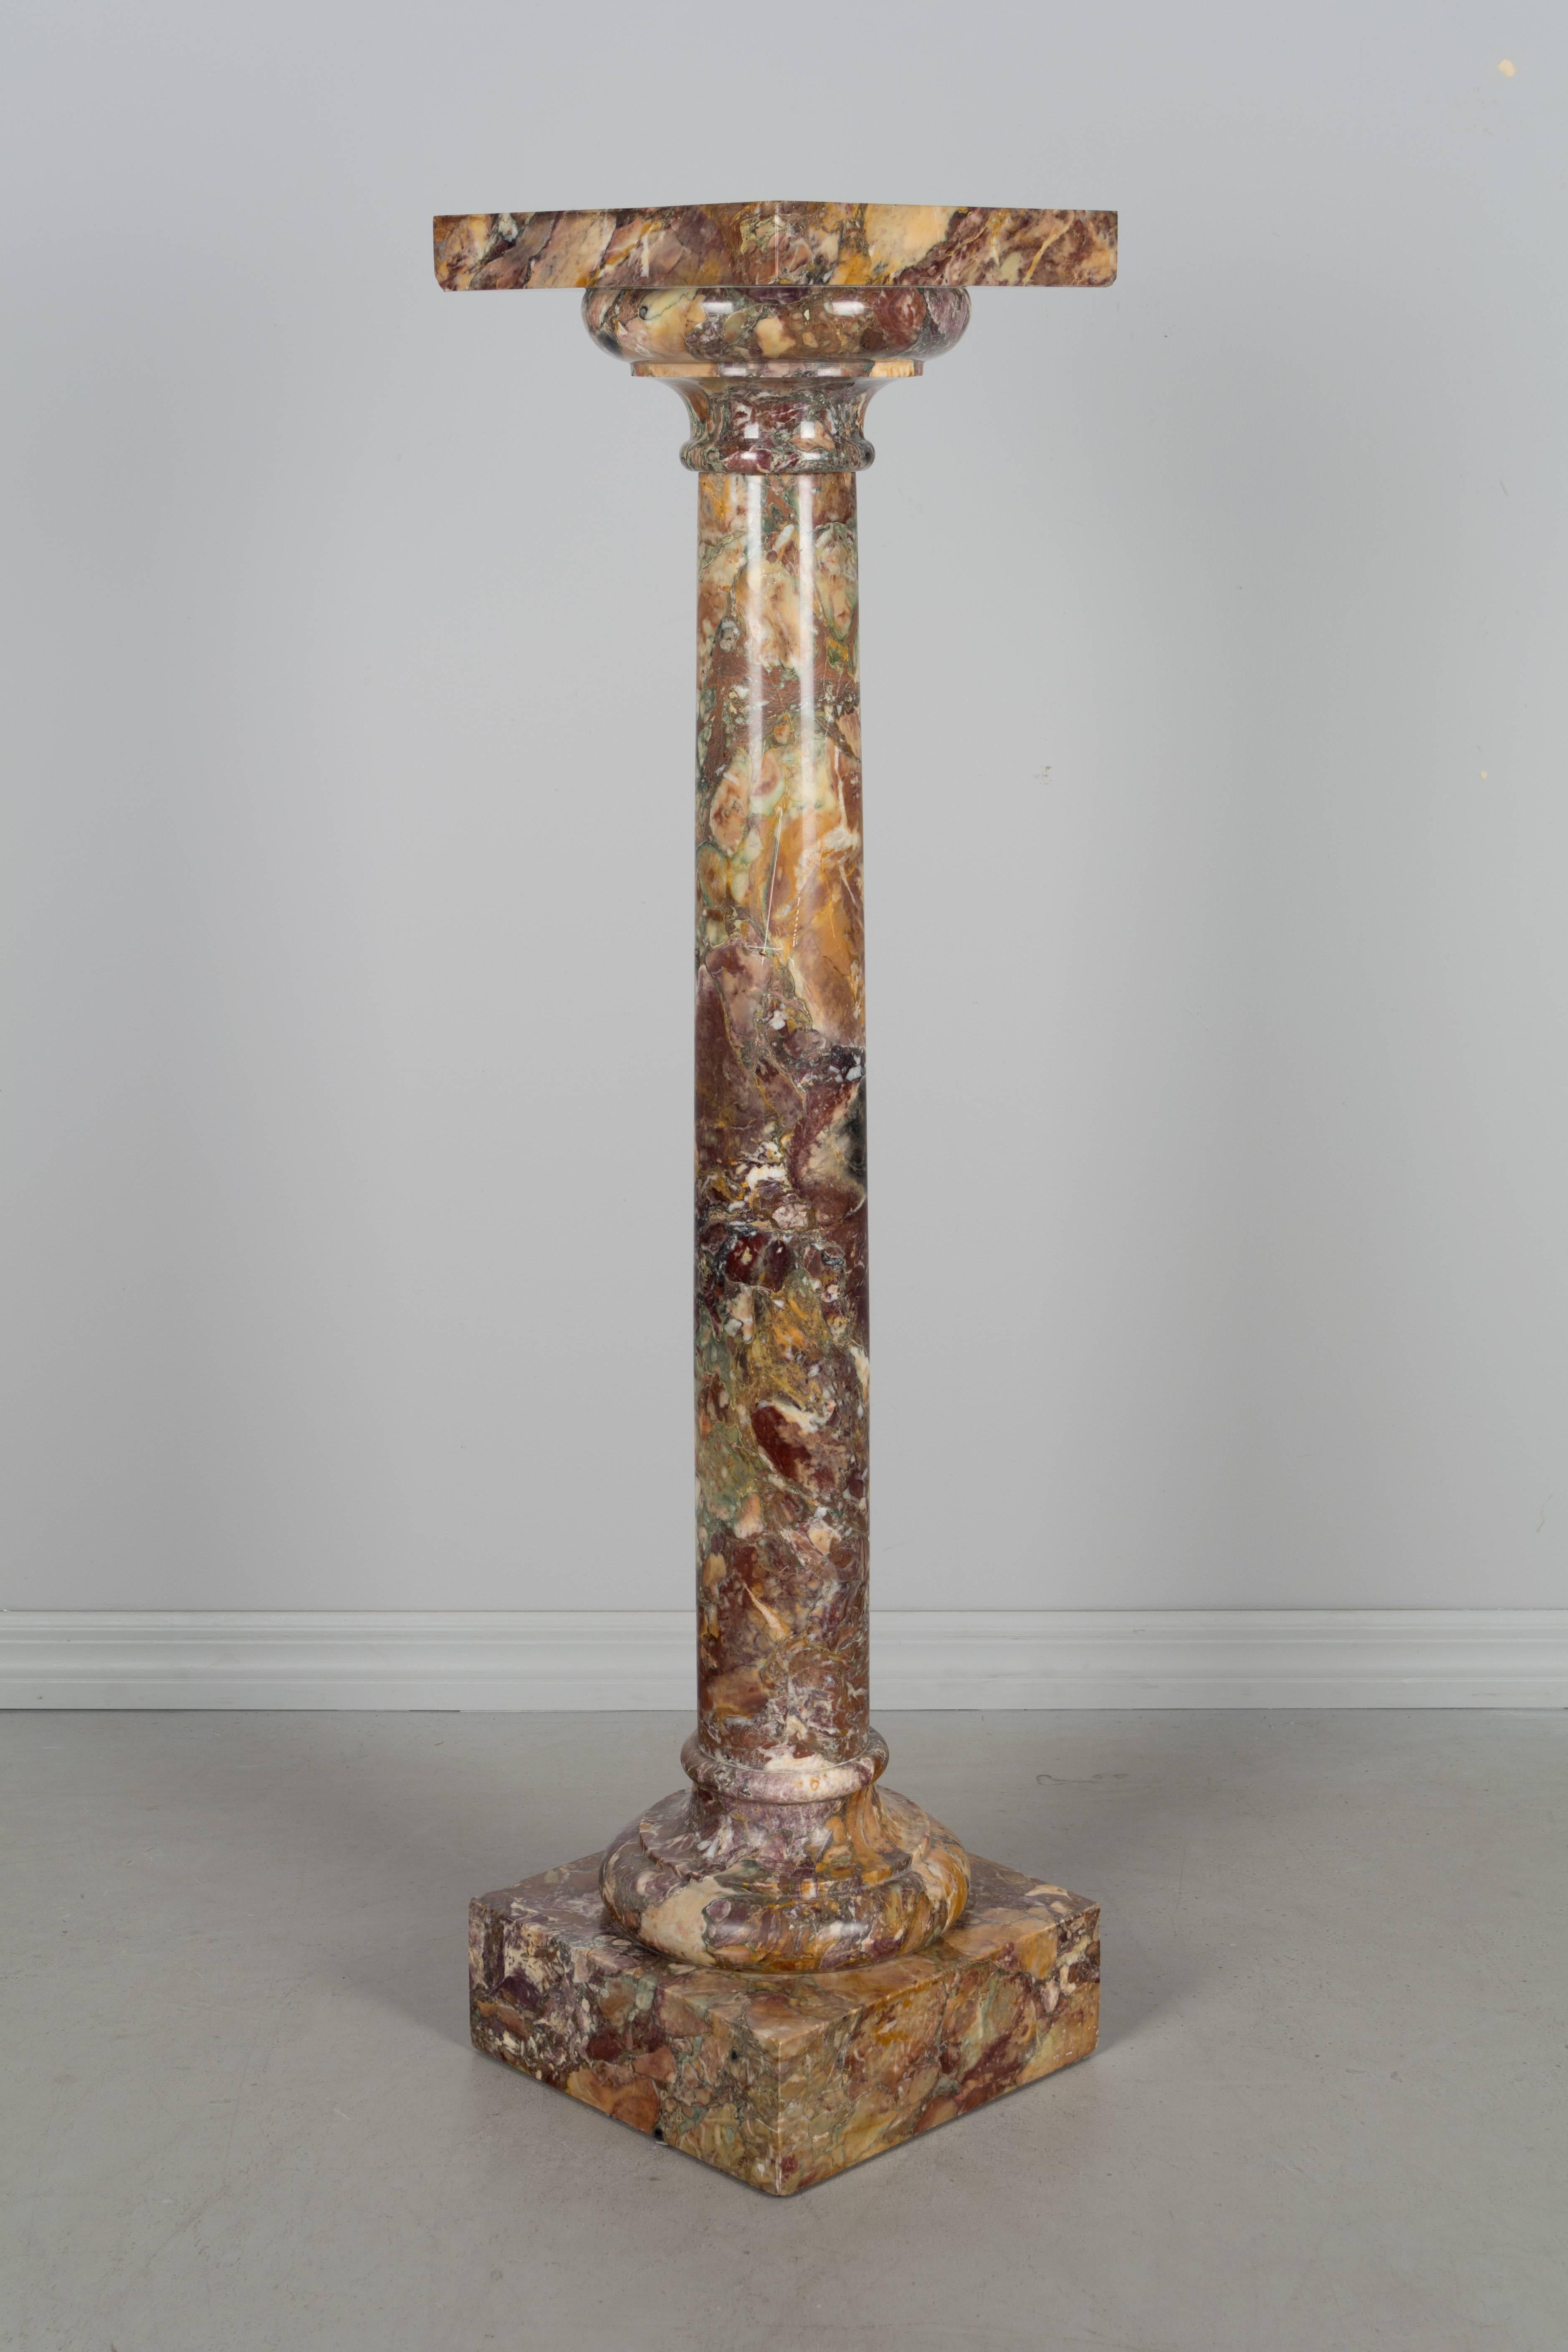 19th century French marble column pedestal. Beautiful color and veining. In three parts. Excellent condition with no chips, but there are scratches in the surface of the top. A good pedestal for displaying a sculpture or for use as an architectural